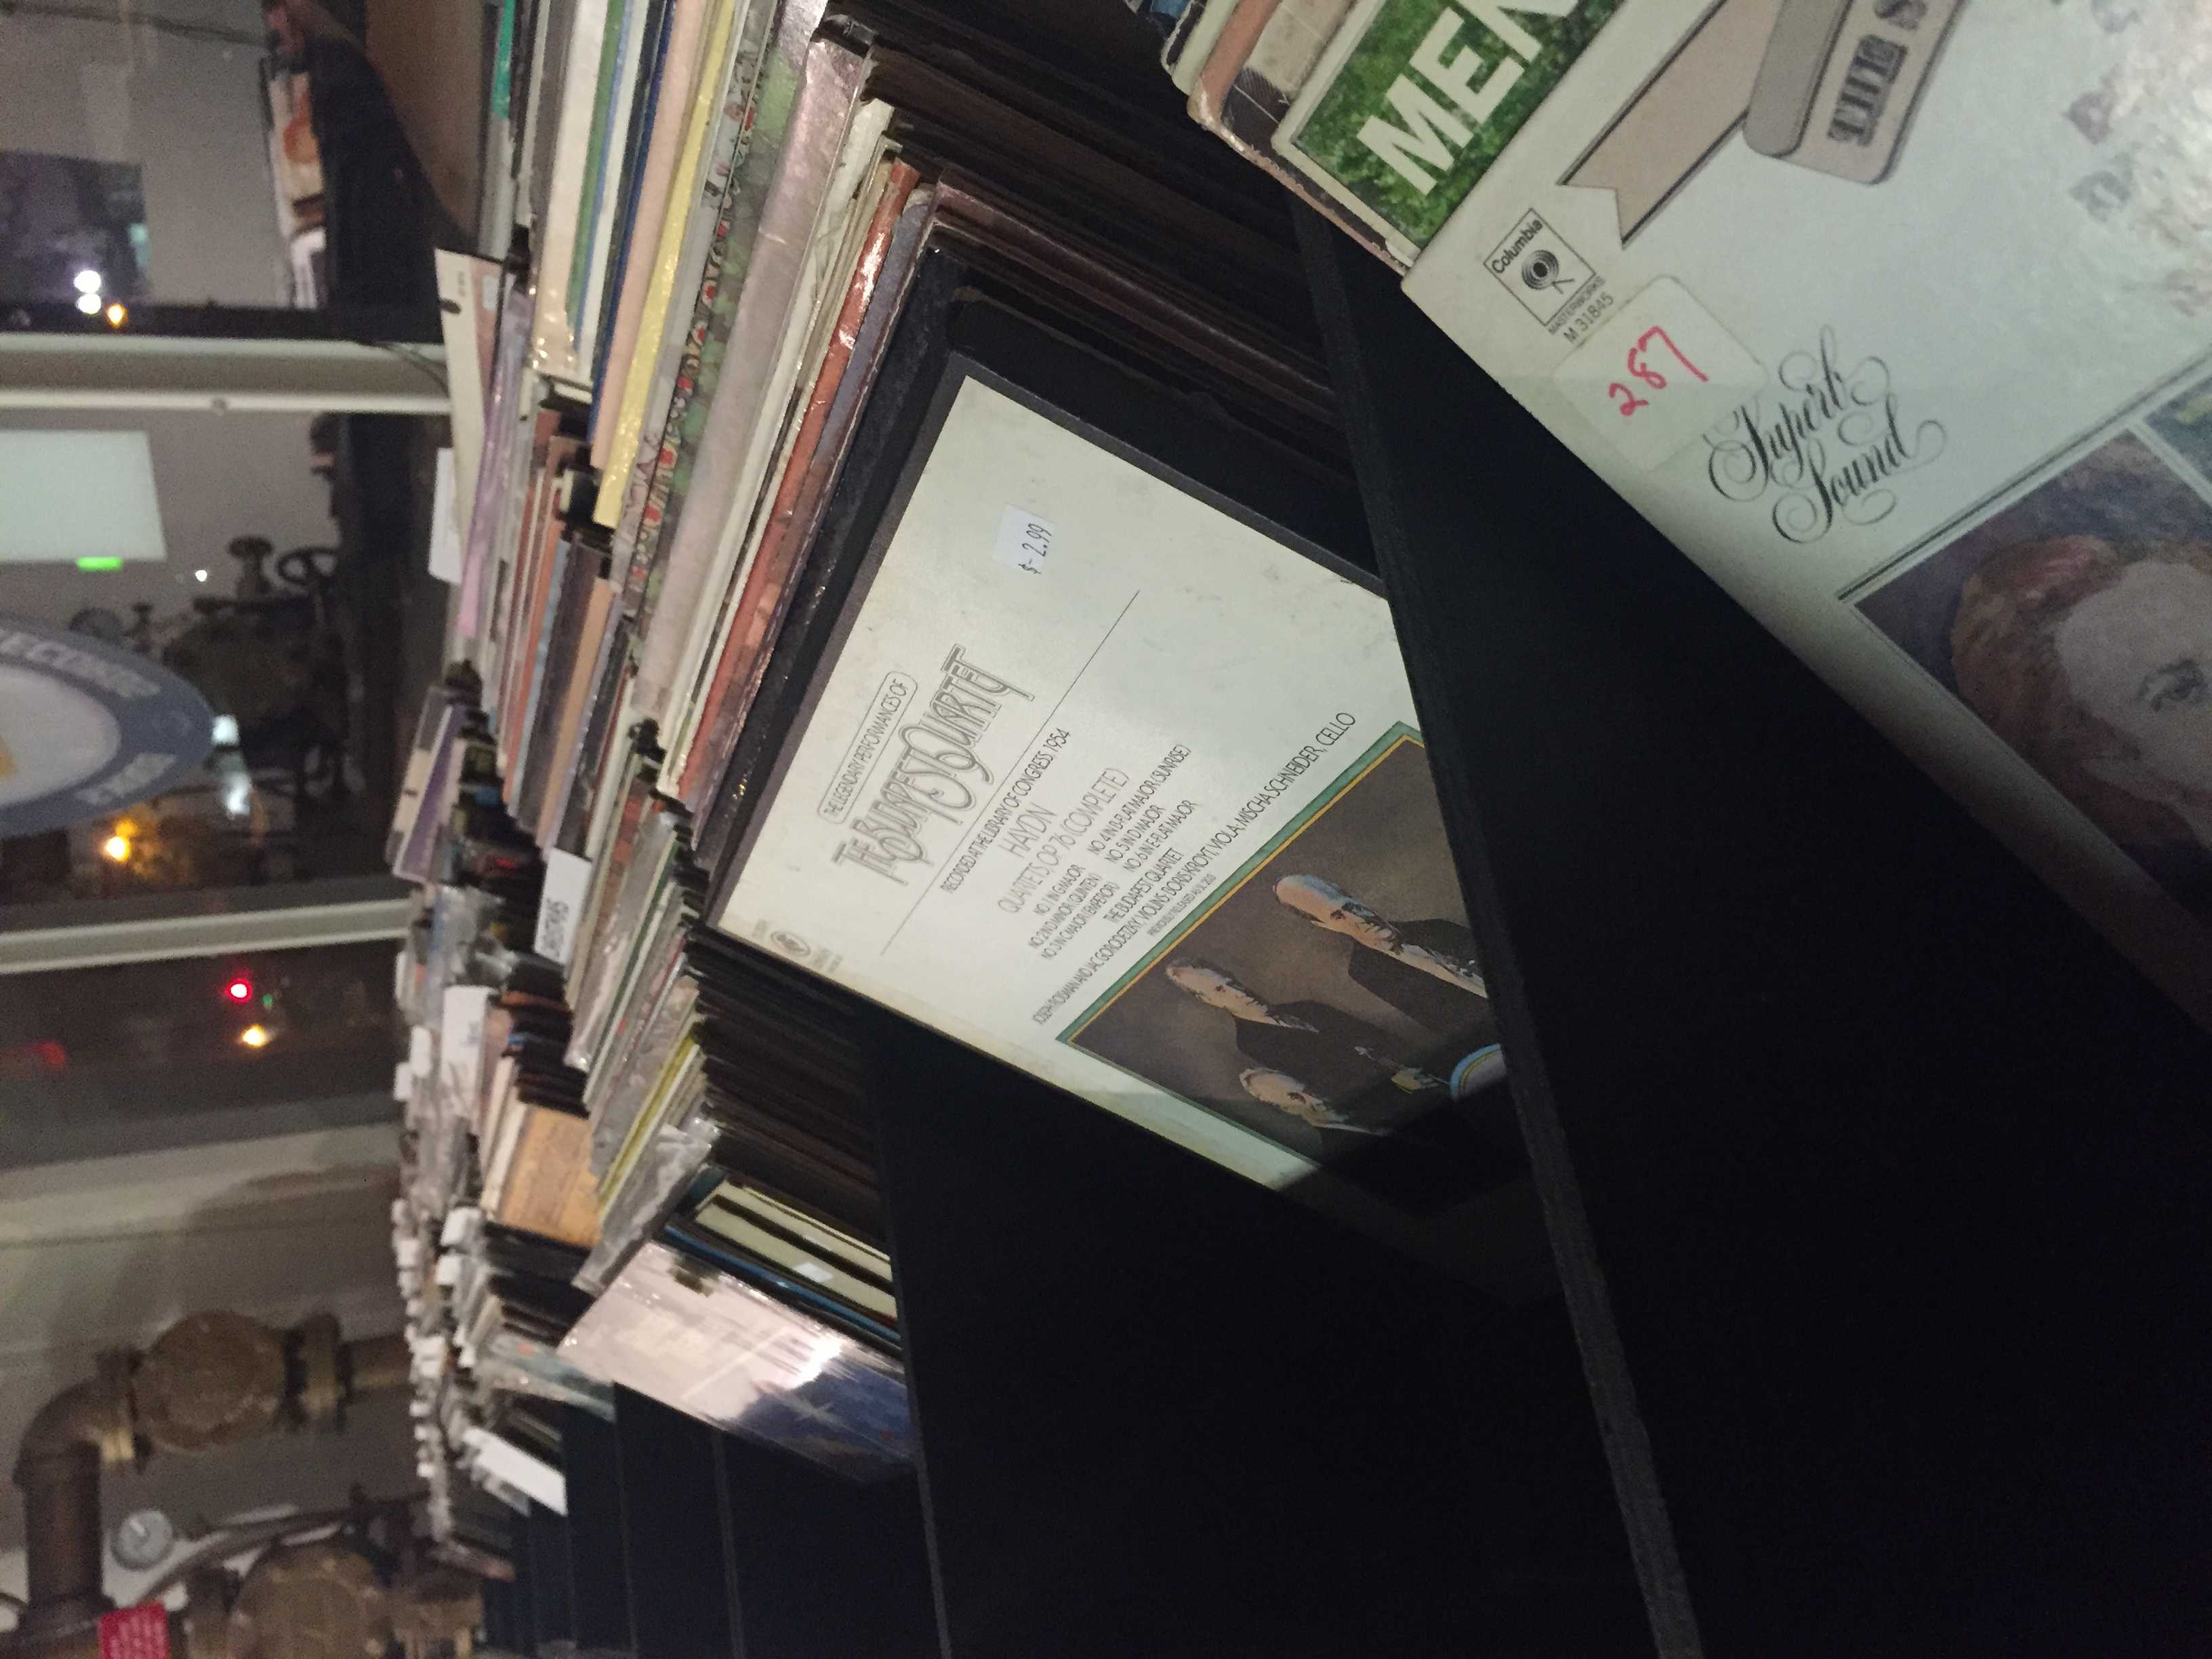 Stacks of vinyl records at Deep Search Records in Riverside. Photo by Patrick Grabowski